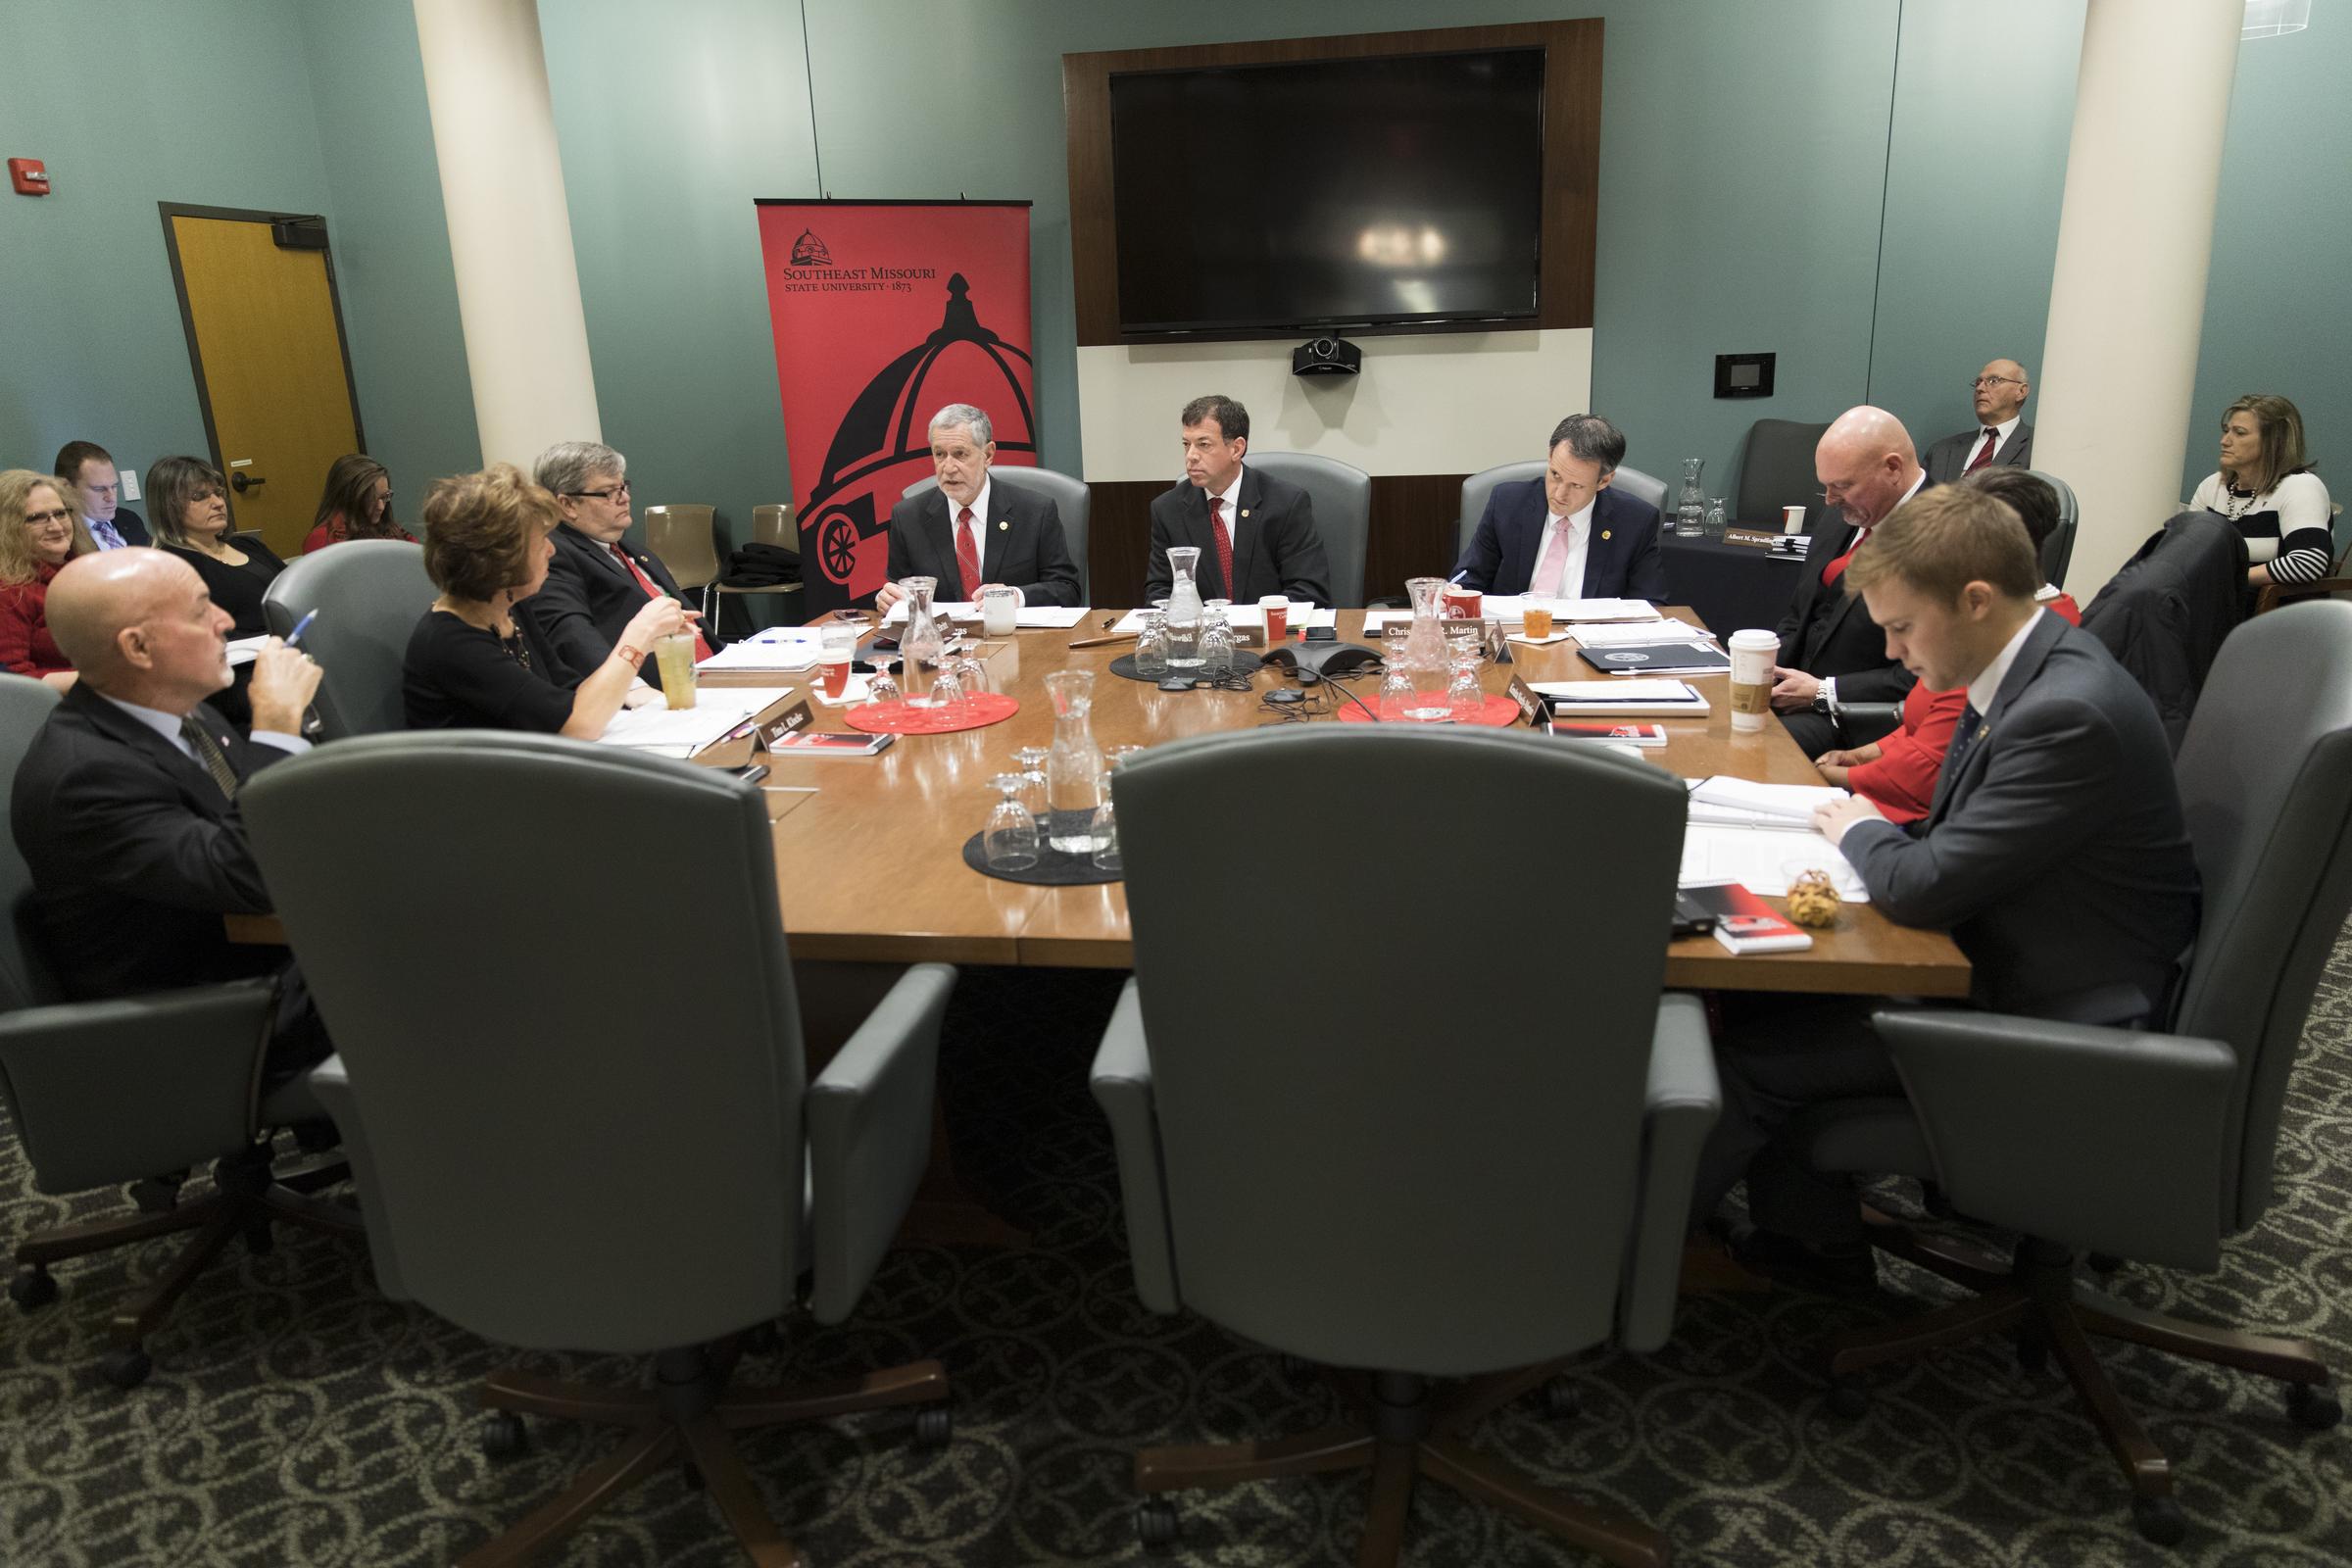 Southeast Board Of Regents Approve Increase In Tuition And